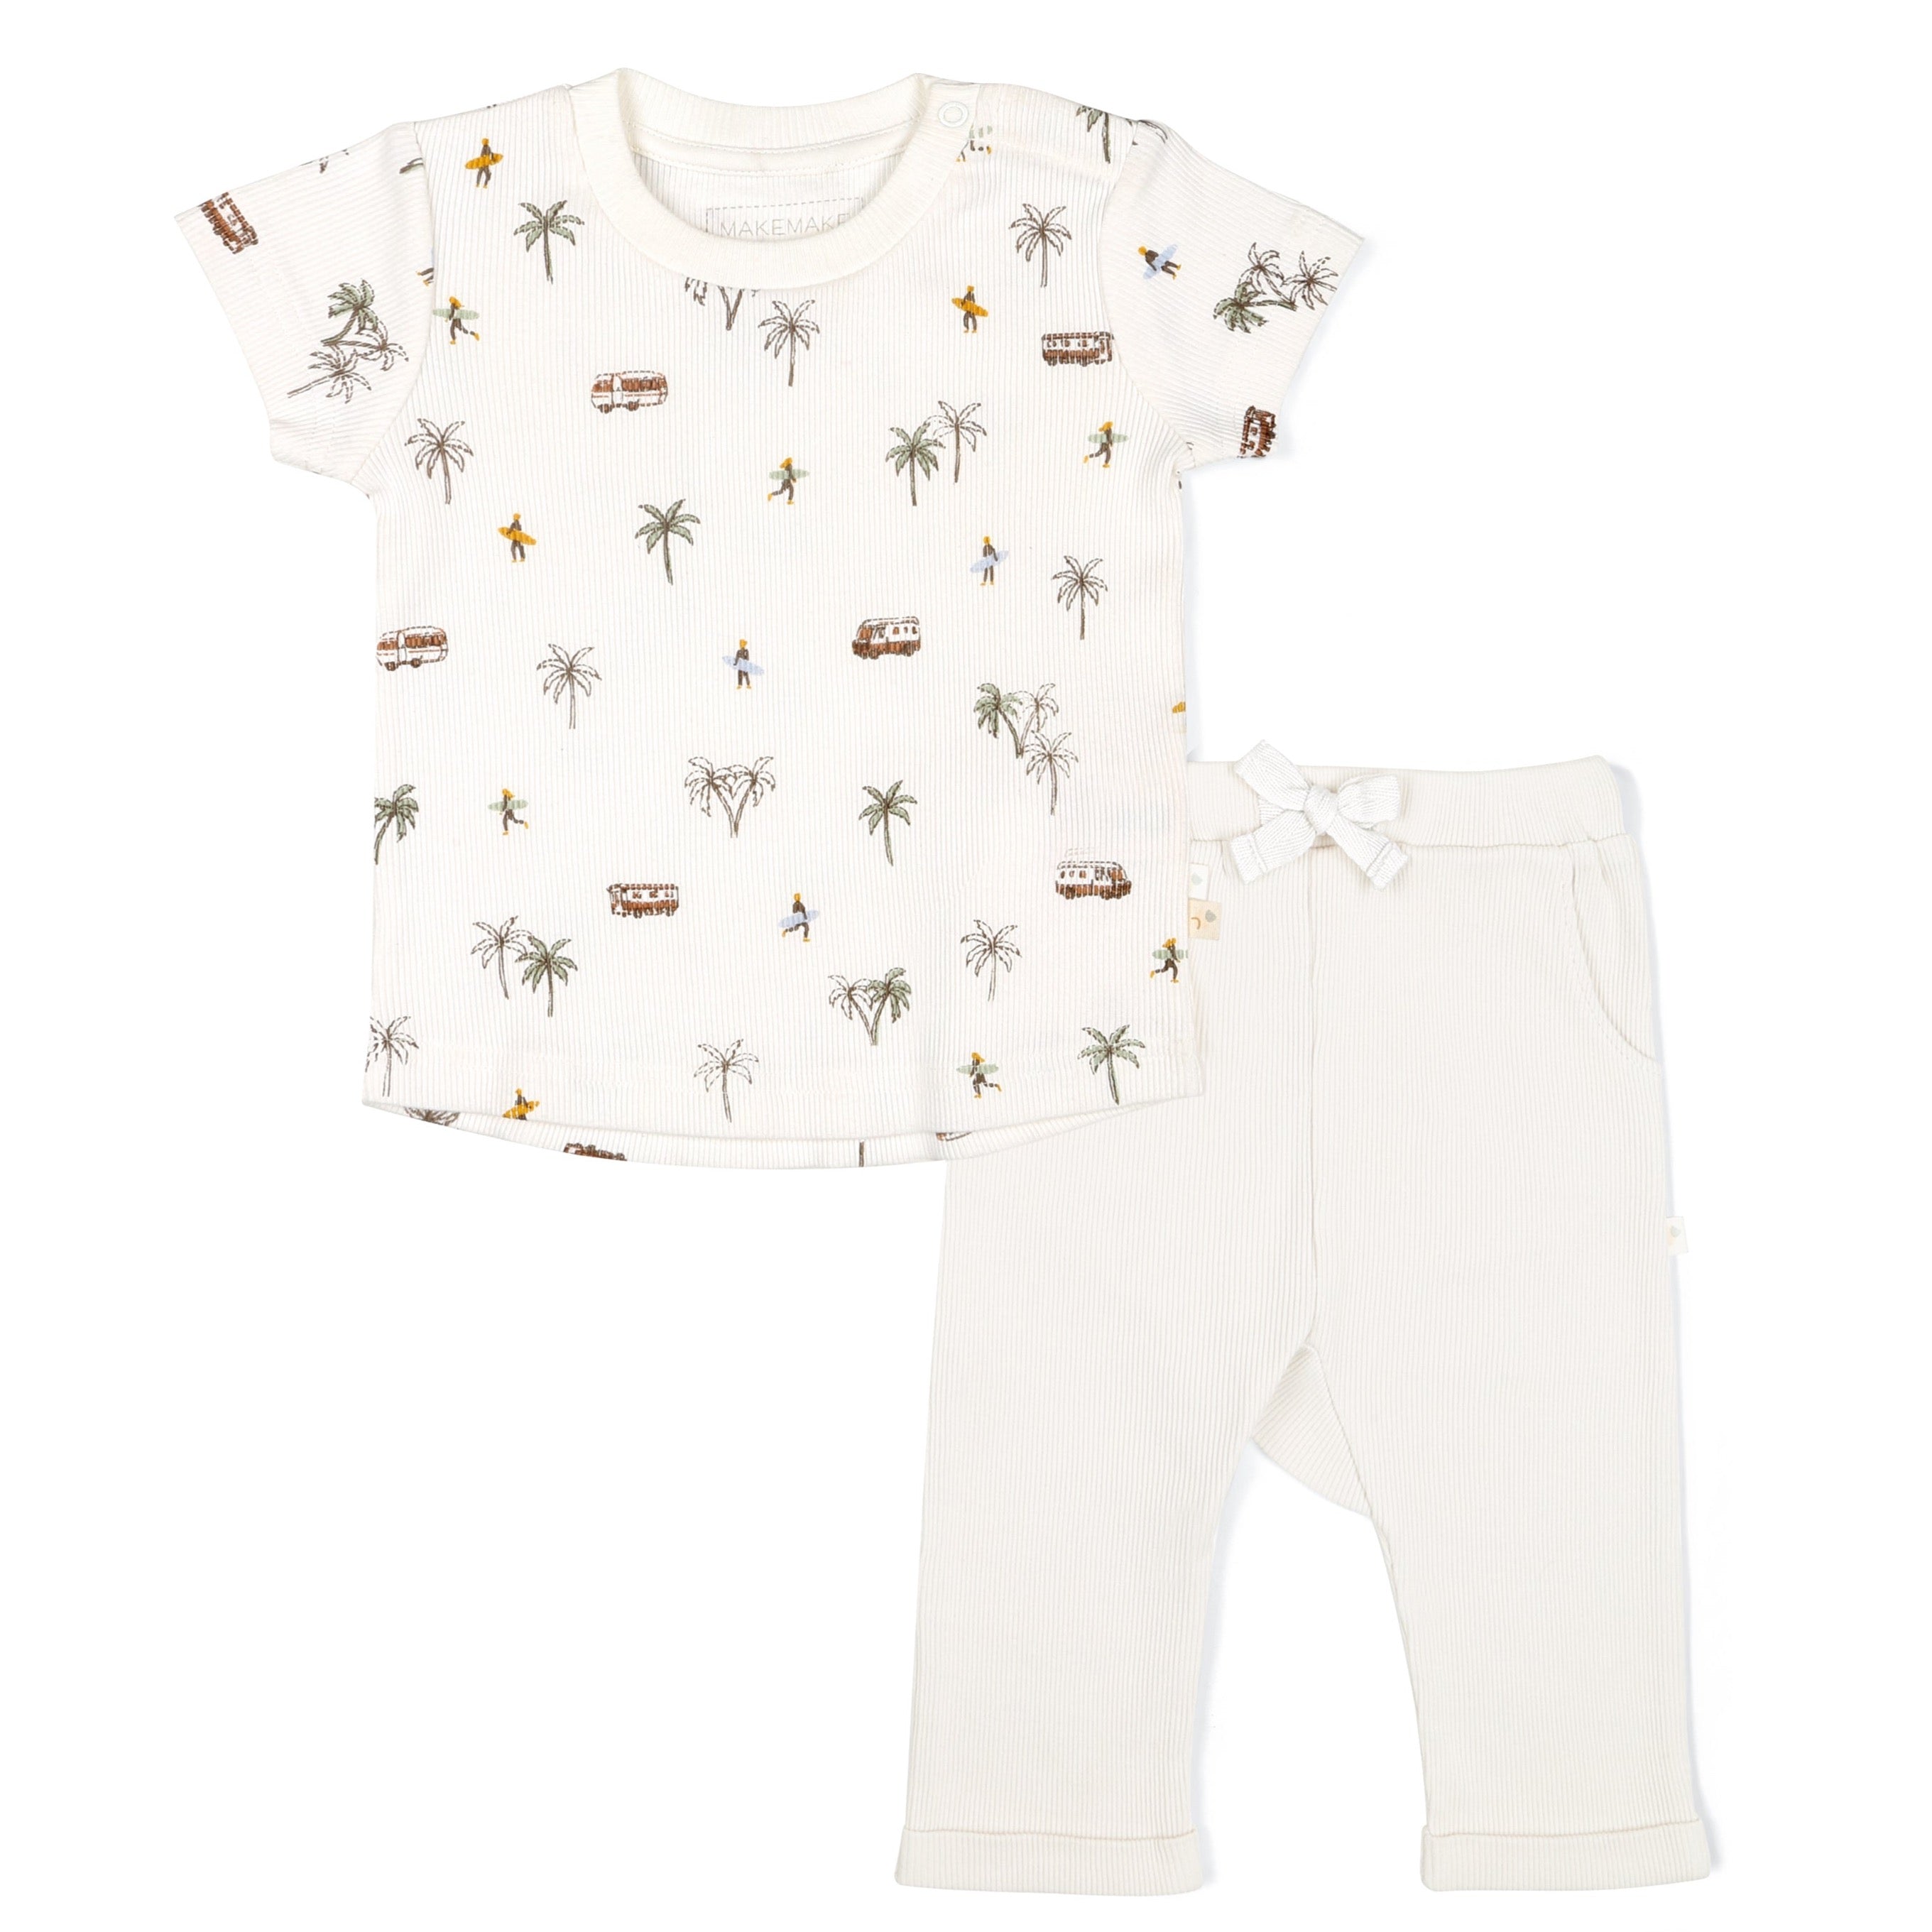 A white baby outfit consisting of a Organic Tee & Pants Set - Malibu from Makemake Organics featuring palm trees and beach images on the shirt, and plain white pants with a bow on one side.